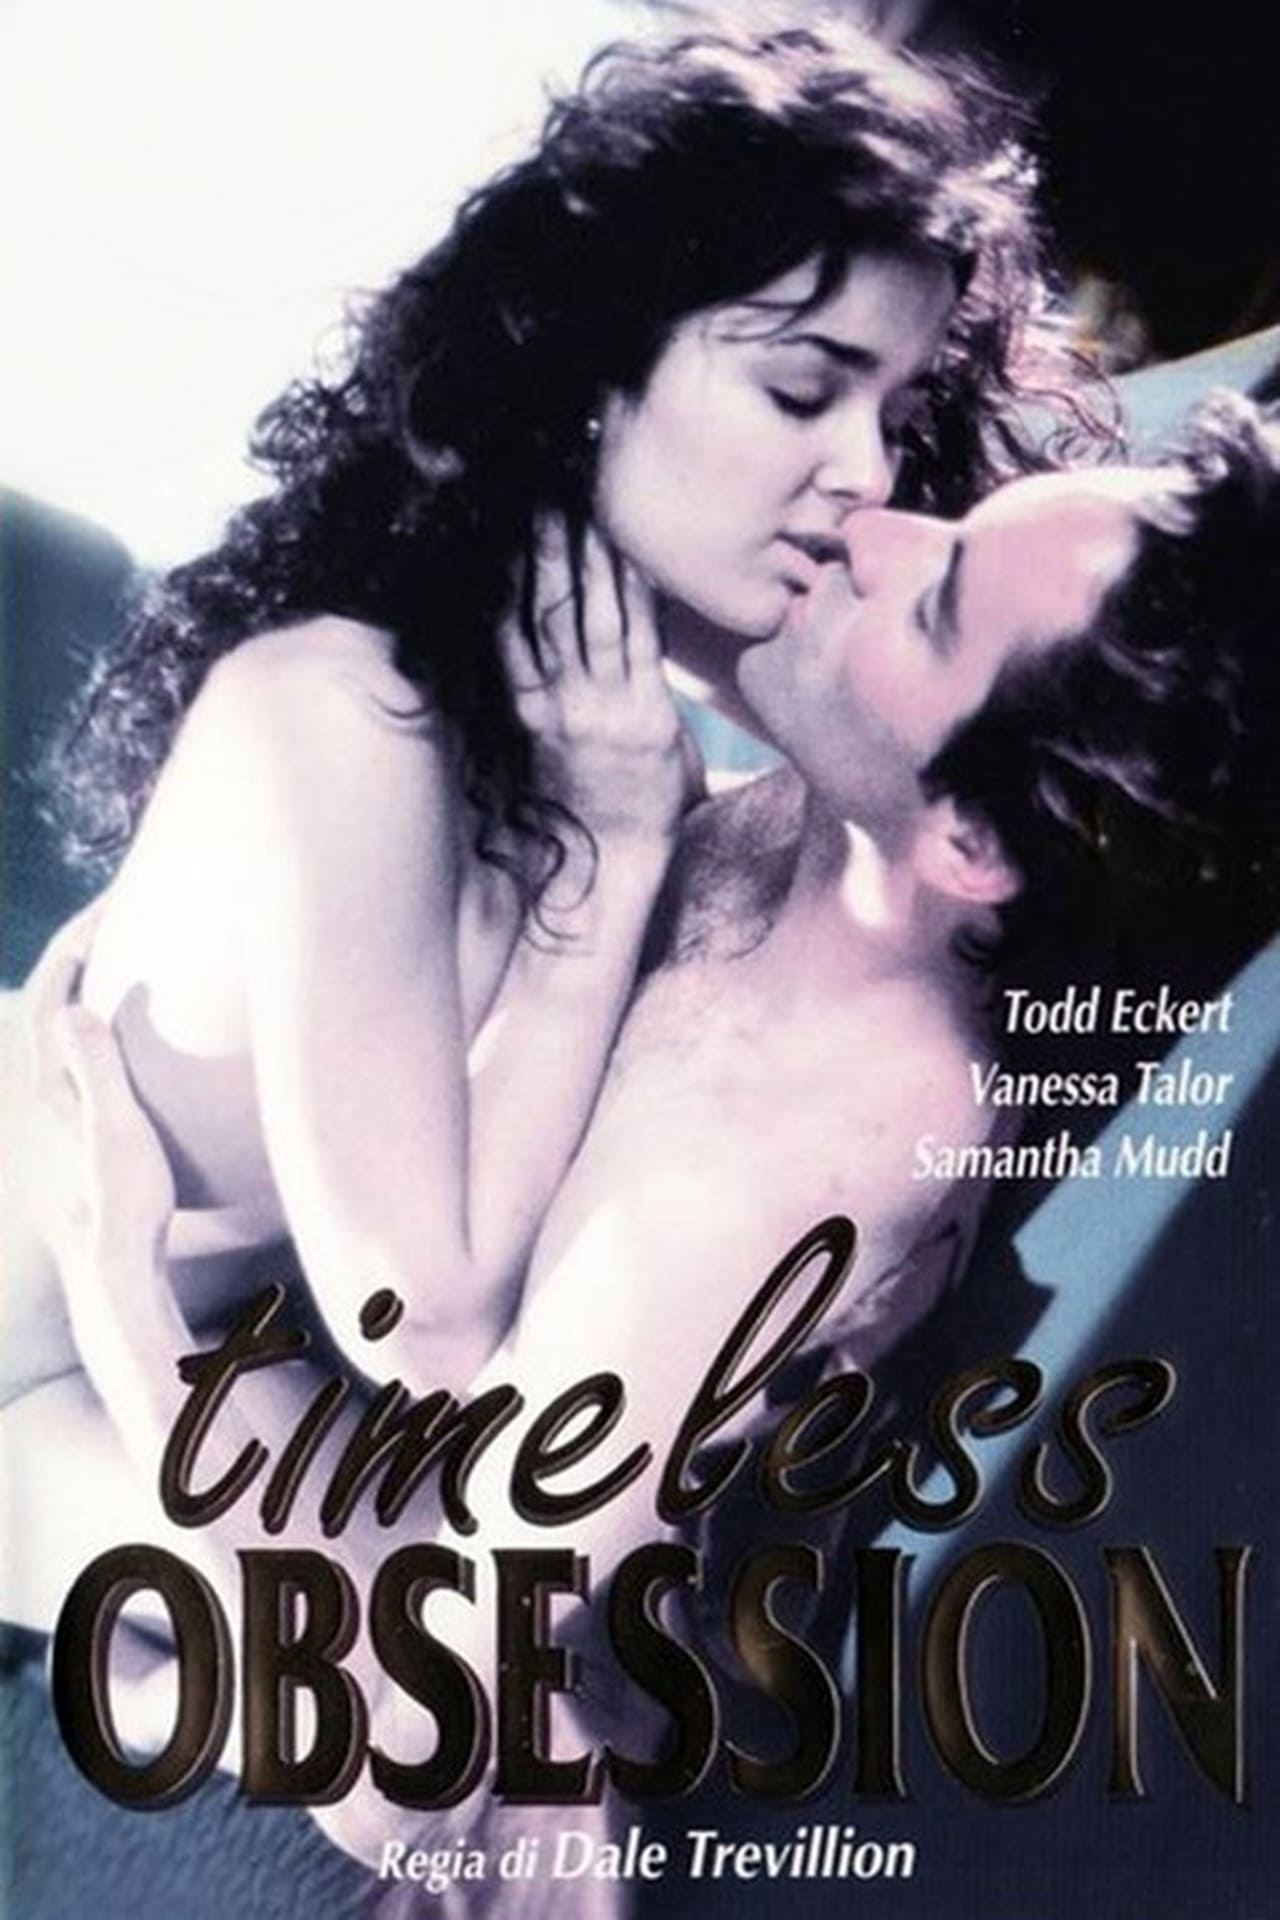 18+Timeless Obsession 1996 English 720p HDRip 800MB Download